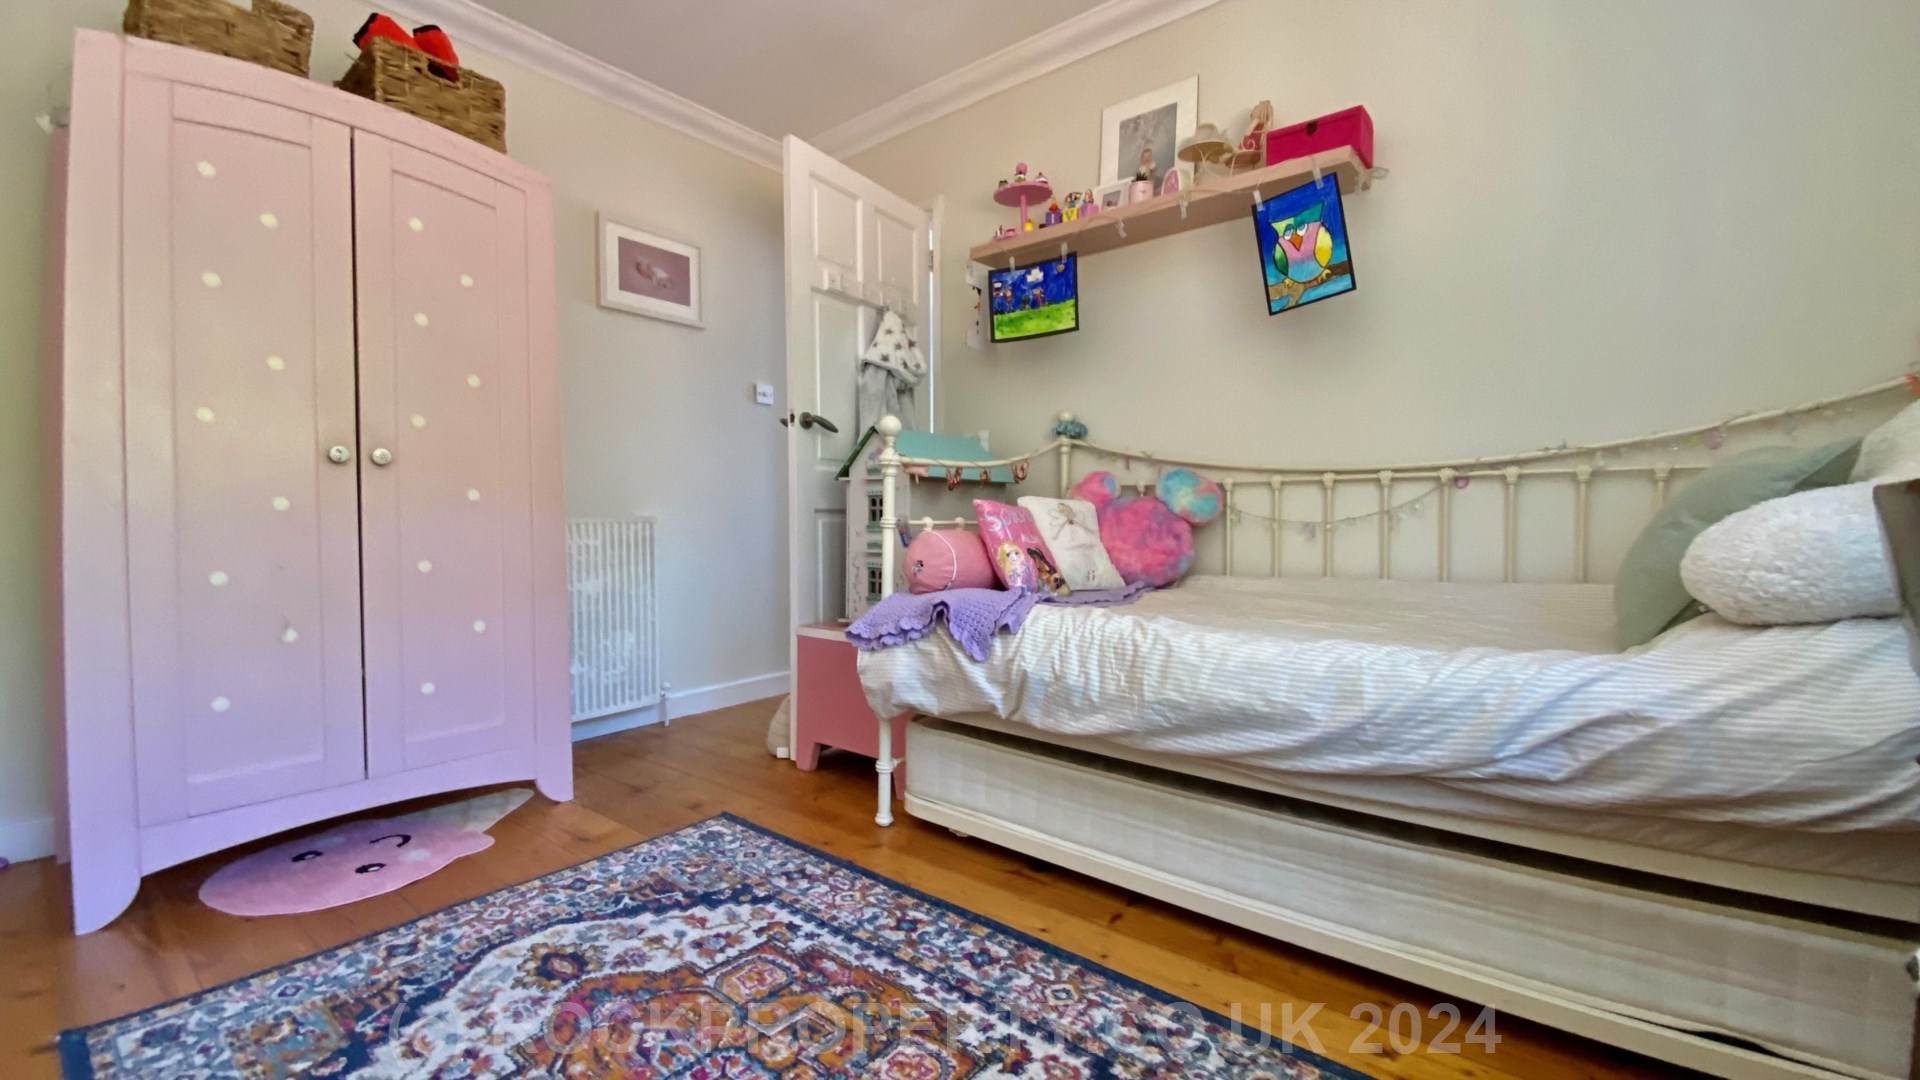 MODERN 3 BED FAMILY HOME, Langley Park, St Saviour, Image 15